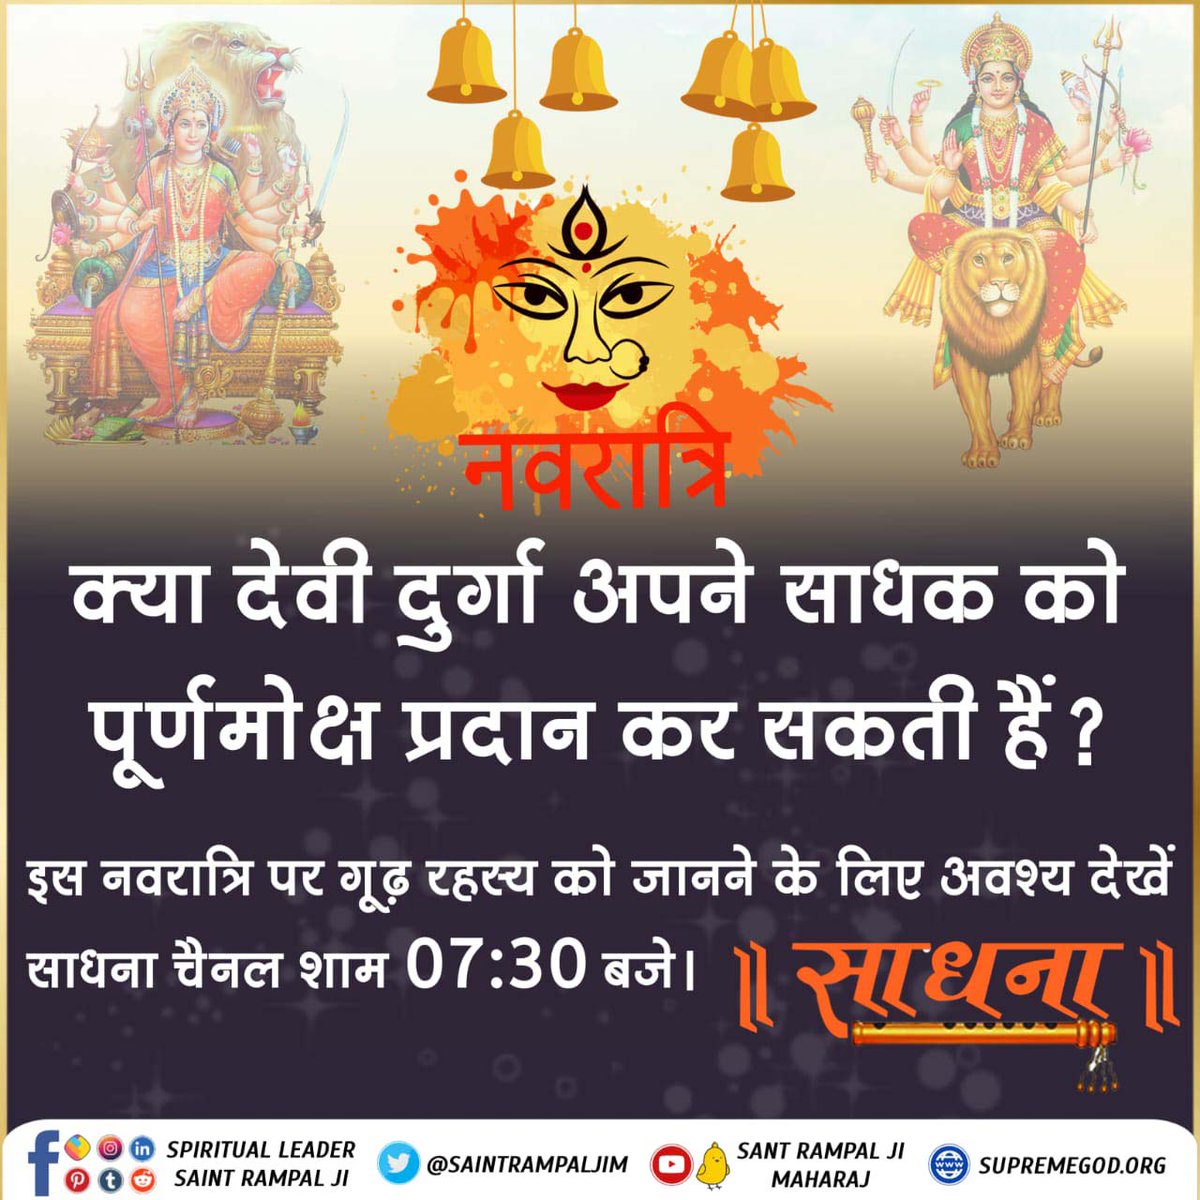 #GodMorningSaturday Who is husband of maa Durga? People who are unaware about the ultimate Spiritual Knowledge worship Goddess Durga. But our Holy Scriptures like Vedas and Shrimad Bhagwat Gita suggest worshiping Almighty God Kabir Saheb.